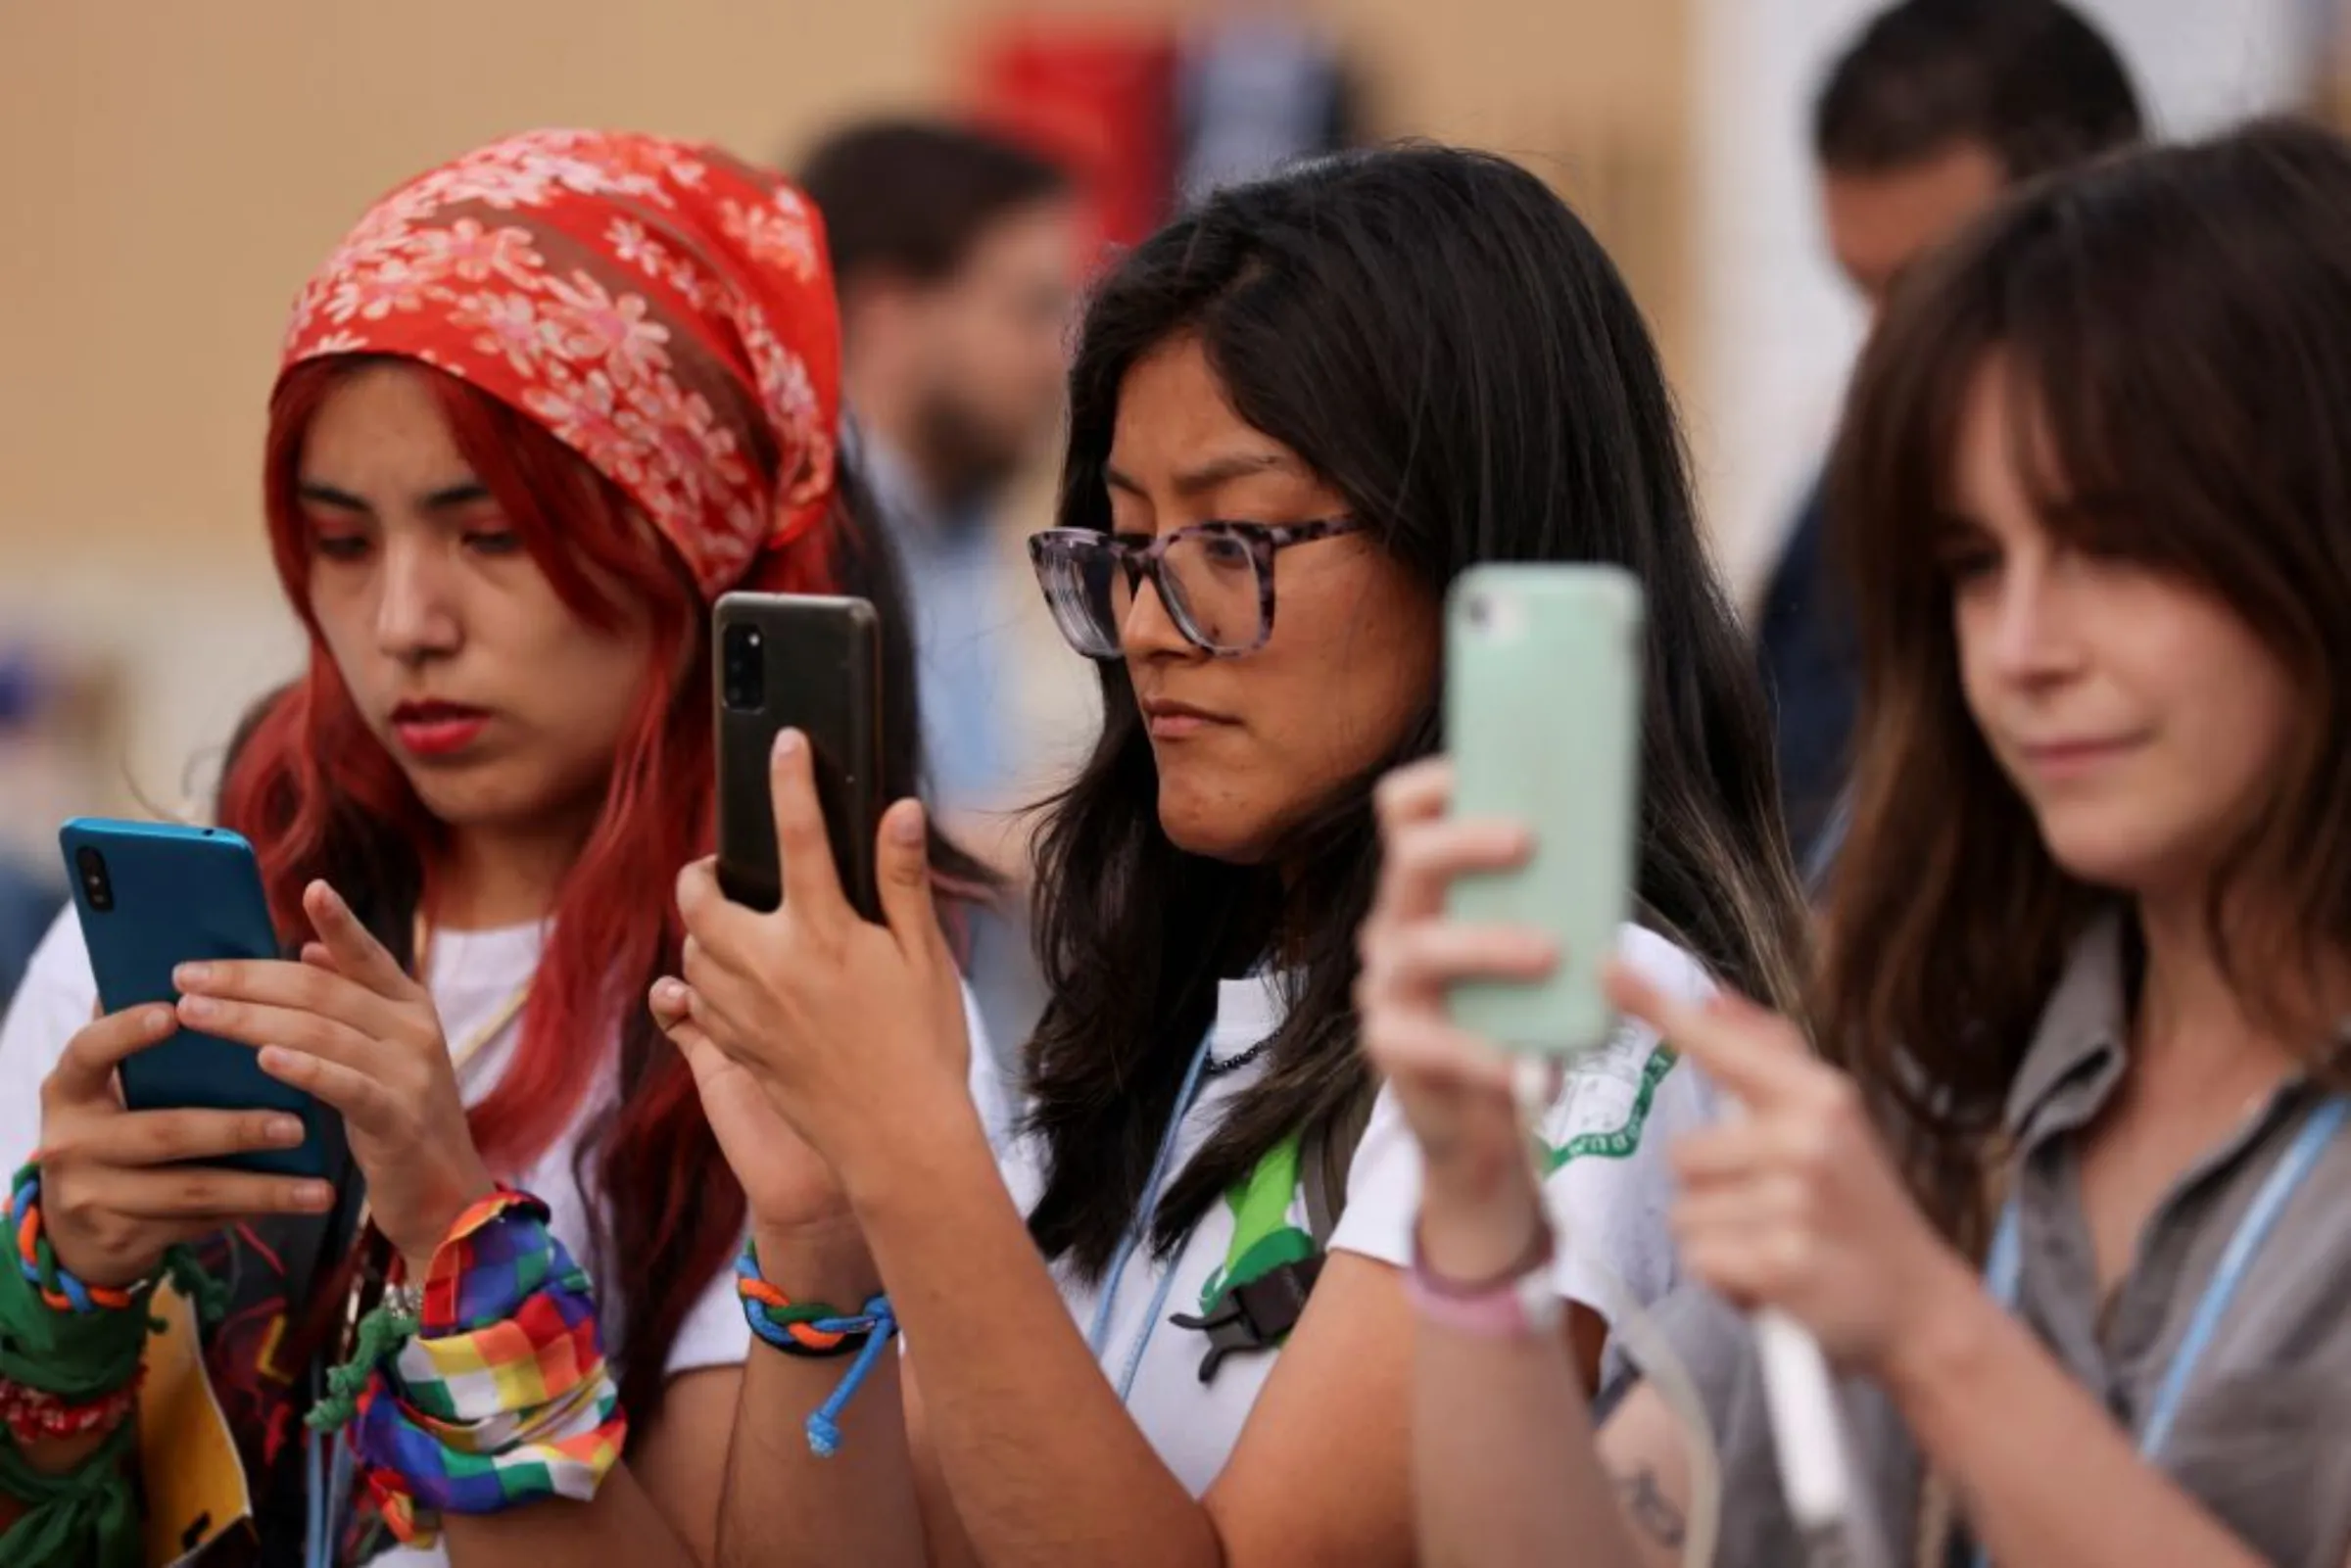 People use their phones as climate activists take part in a protest during the COP27 climate summit, in Sharm el-Sheikh, Egypt, November 17, 2022. REUTERS/Mohamed Abd El Ghany